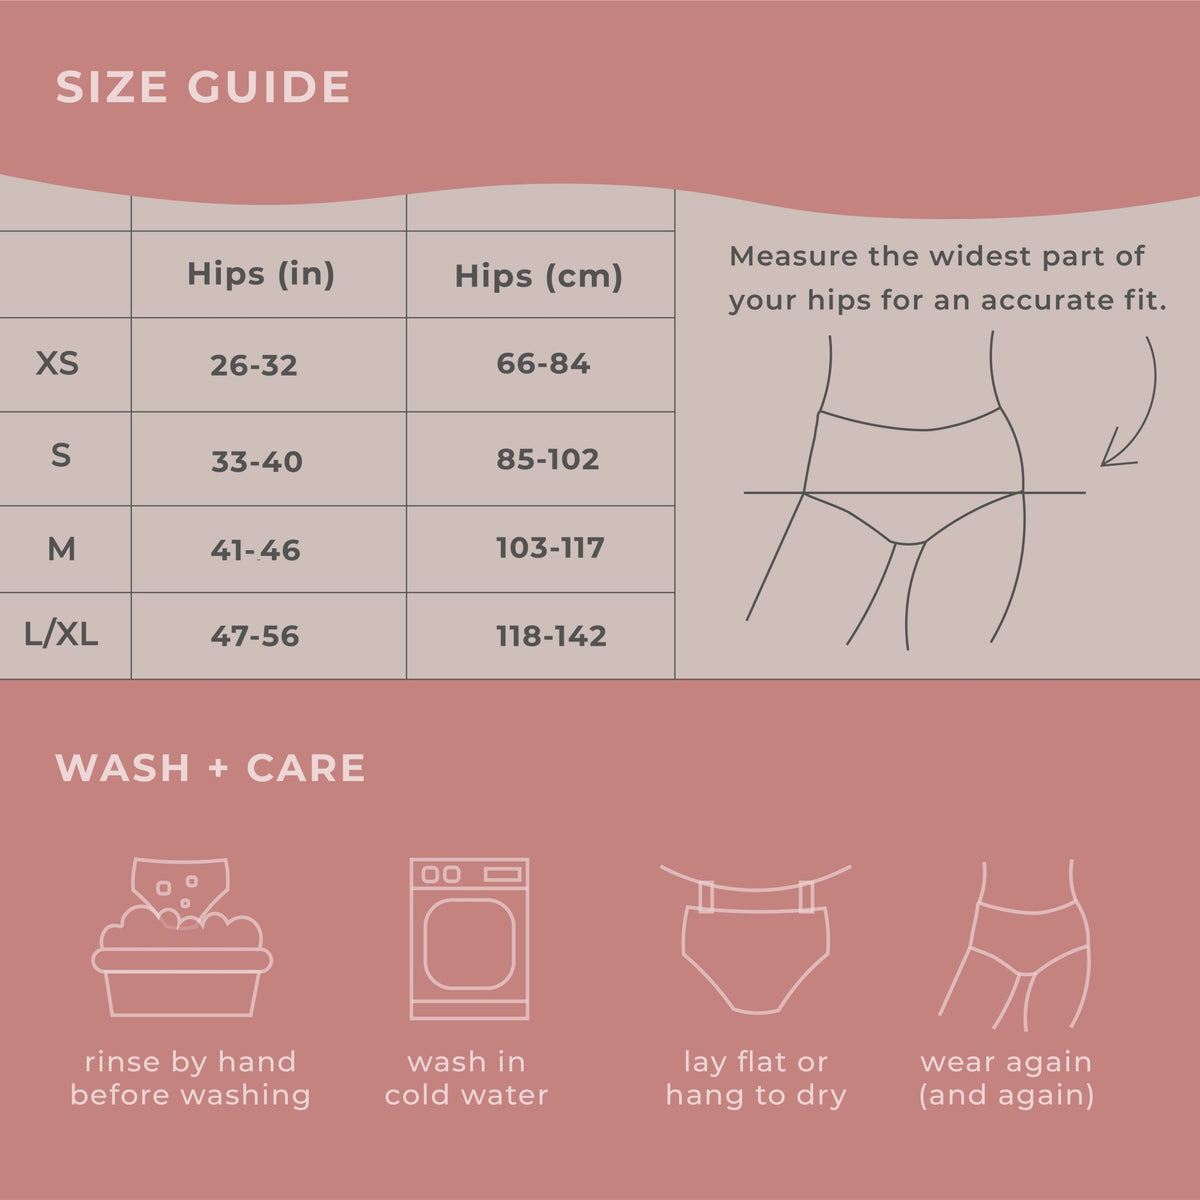 Super Comfy High-waisted Period Underwear - VOXAPOD® soft reusable medical grade silicone fda approved period cup